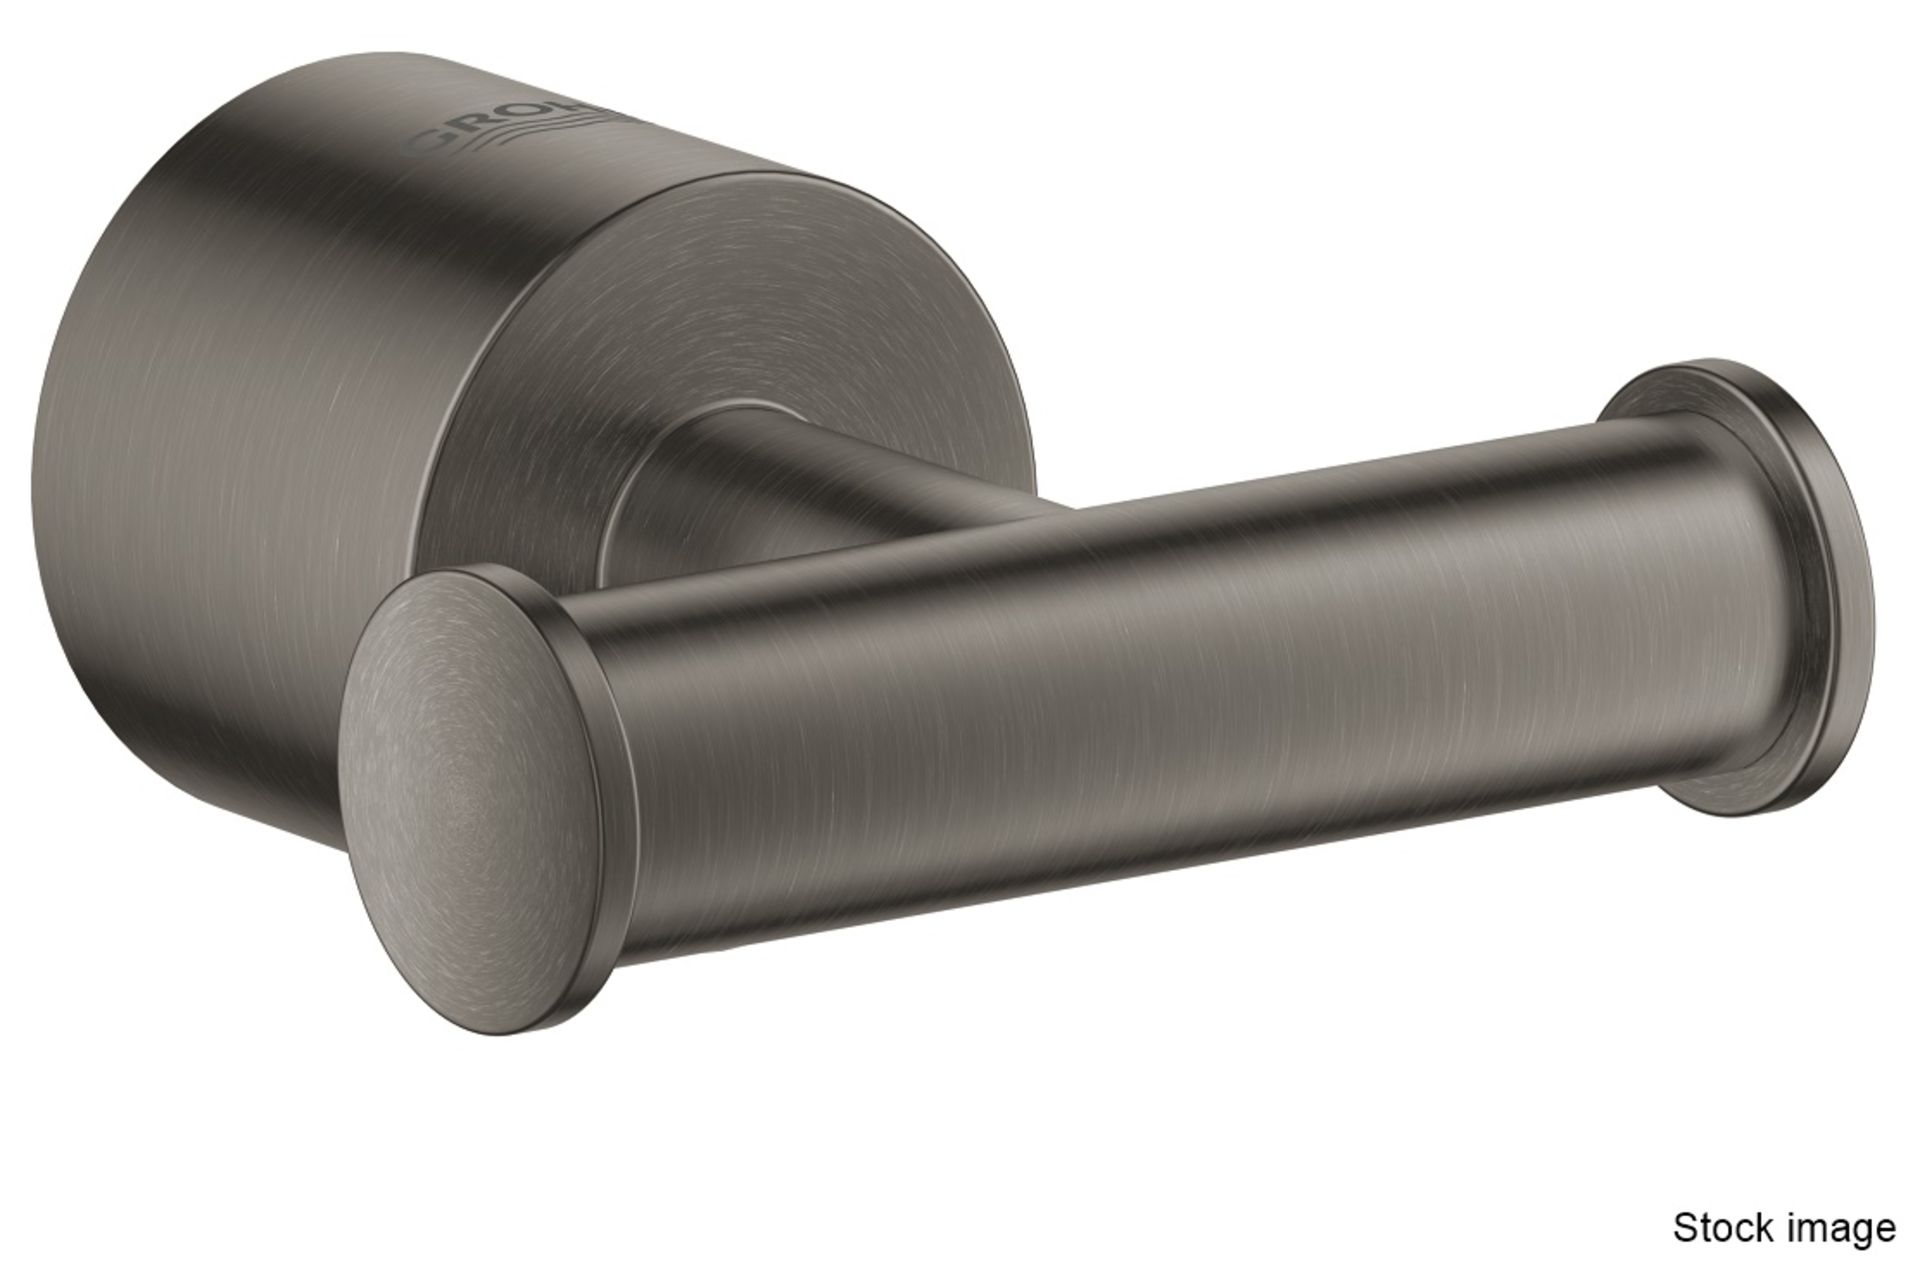 1 x GROHE Atrio Robe Hook, With A Brushed Graphite Finish - Ref: 40312000 - New & Boxed Stock -